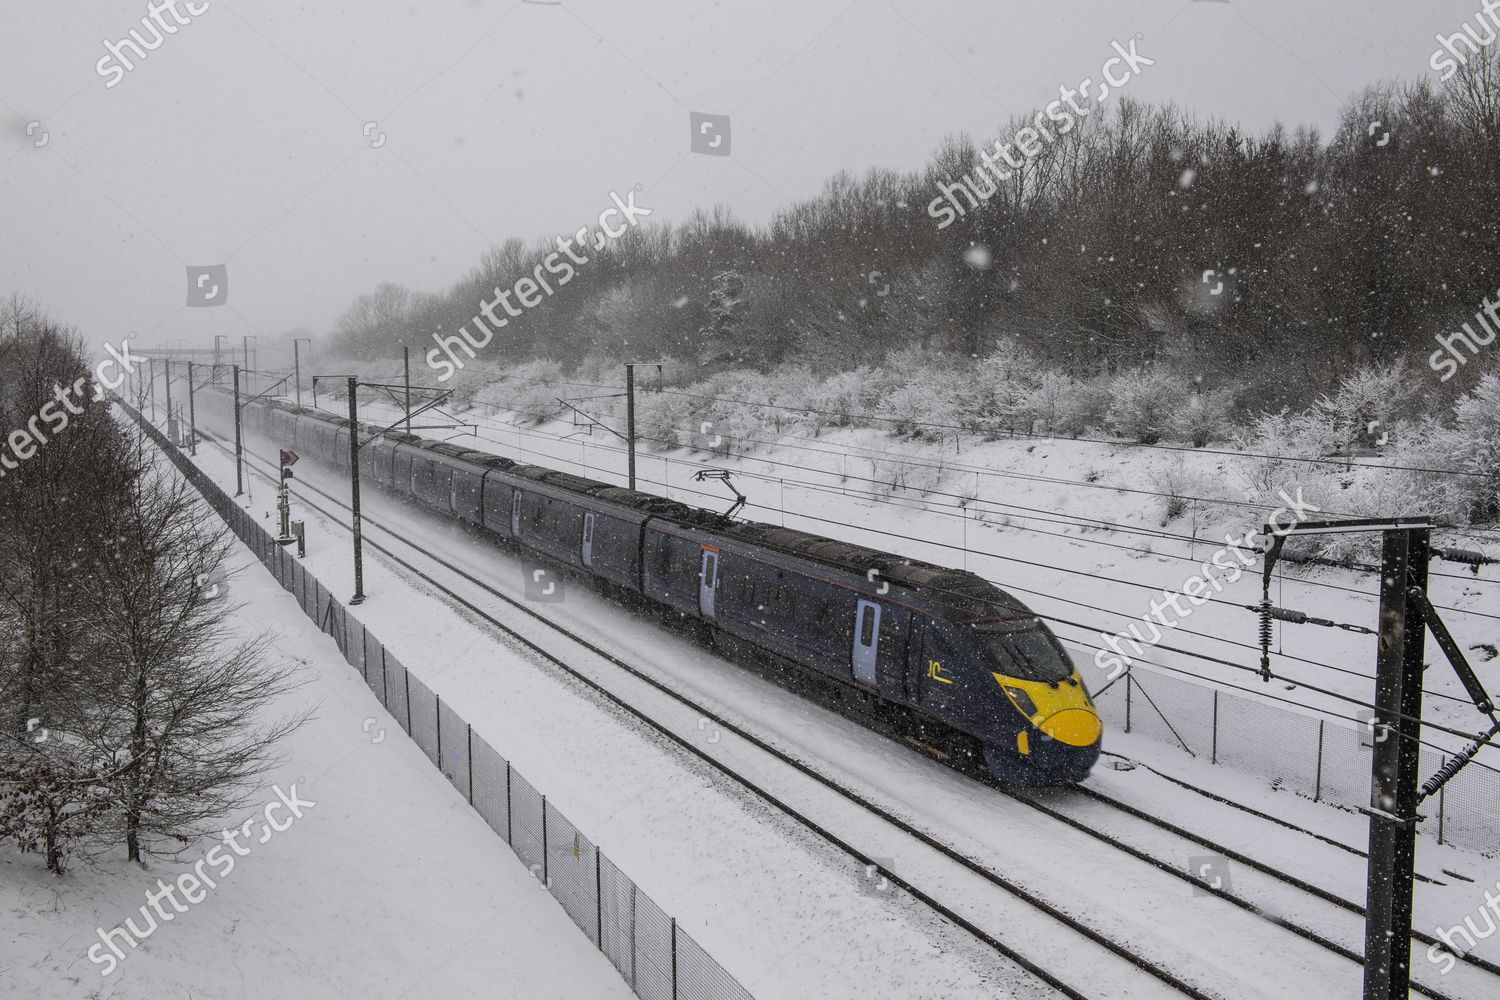 Beast East Twoan Amber Snow Warning Meaning Editorial Stock Photo Stock Image Shutterstock